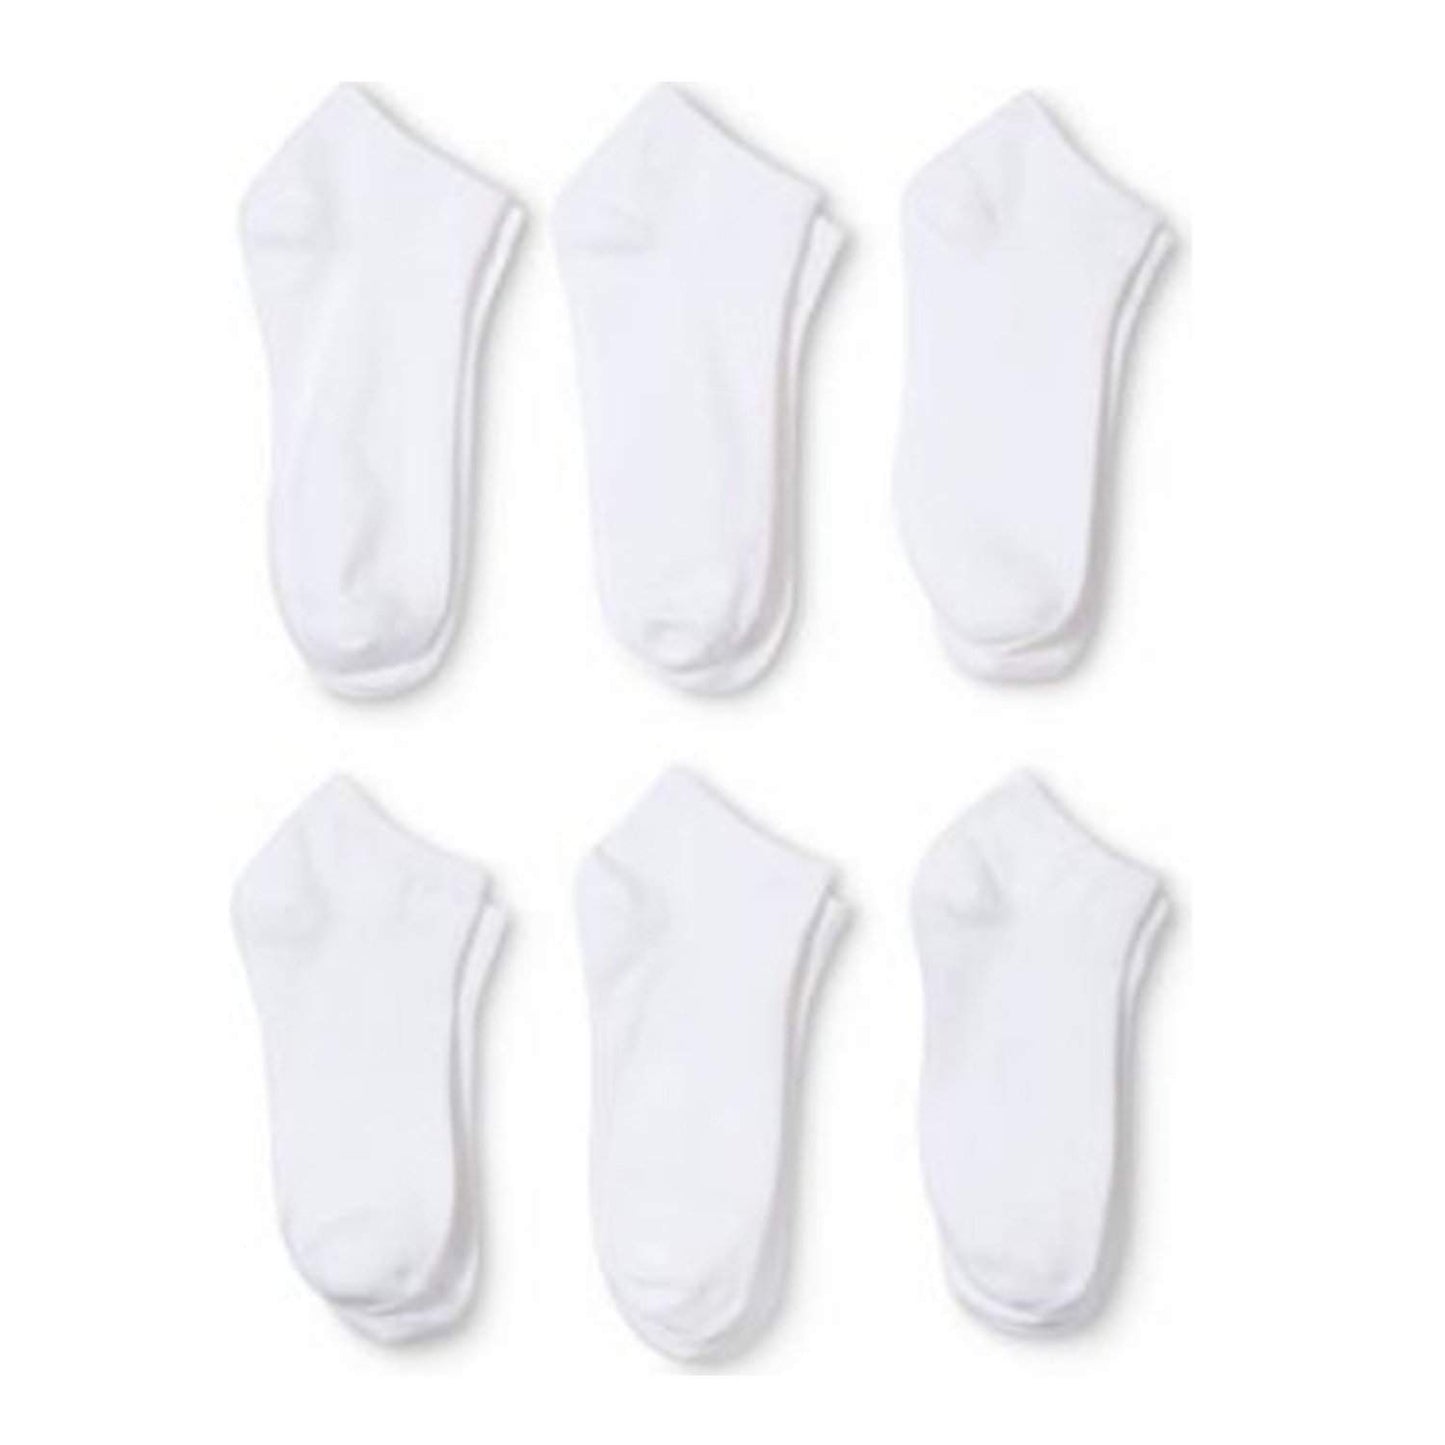 24 Pairs Women's Low Cut No Show Socks 9-11 or 6-8 Black or White or Mixed